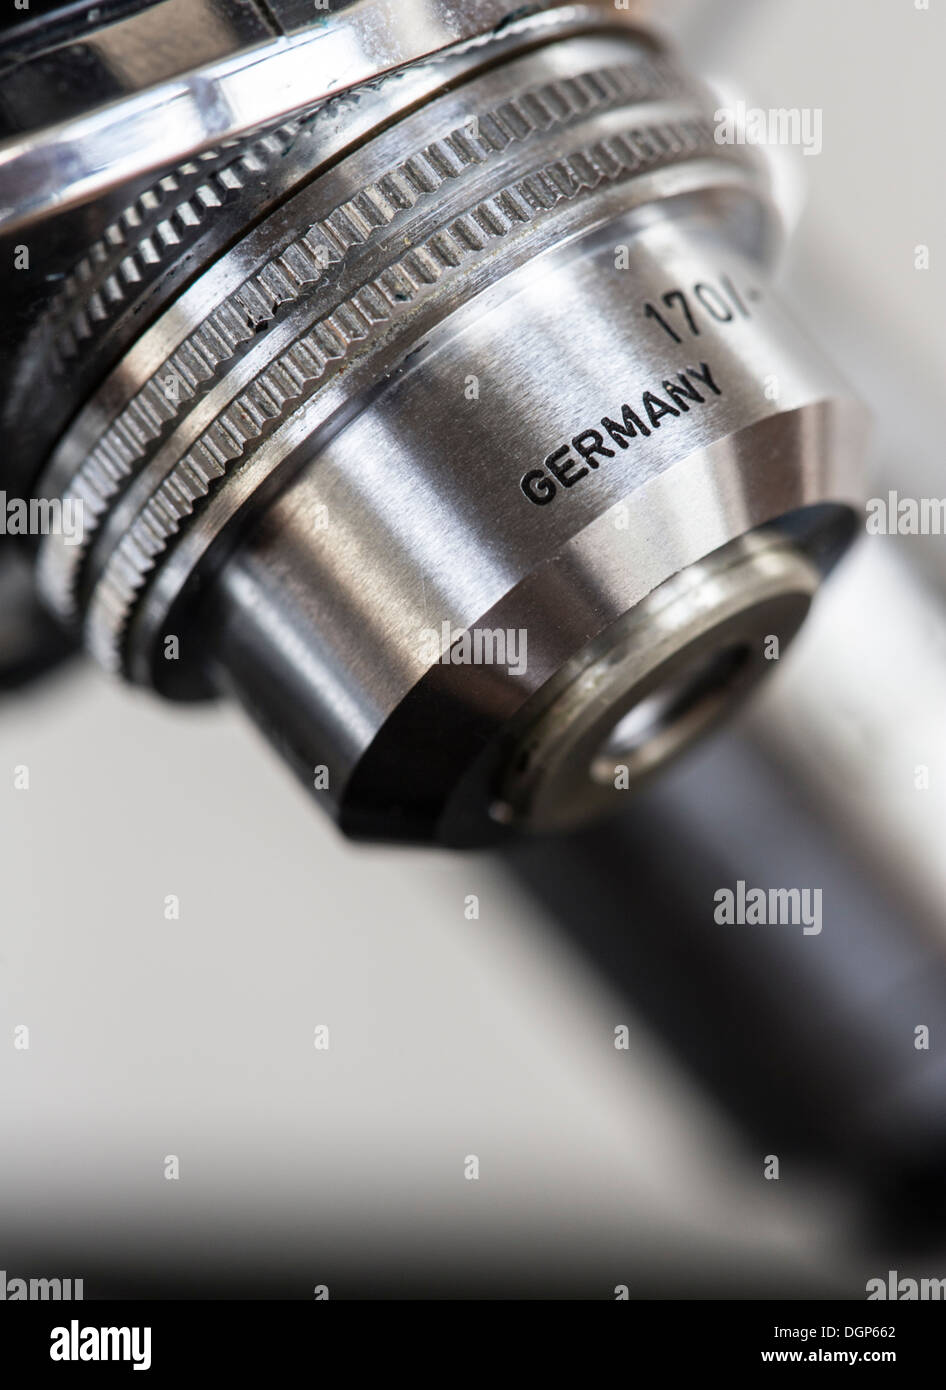 Seal of quality Made in Germany at a microscope Stock Photo